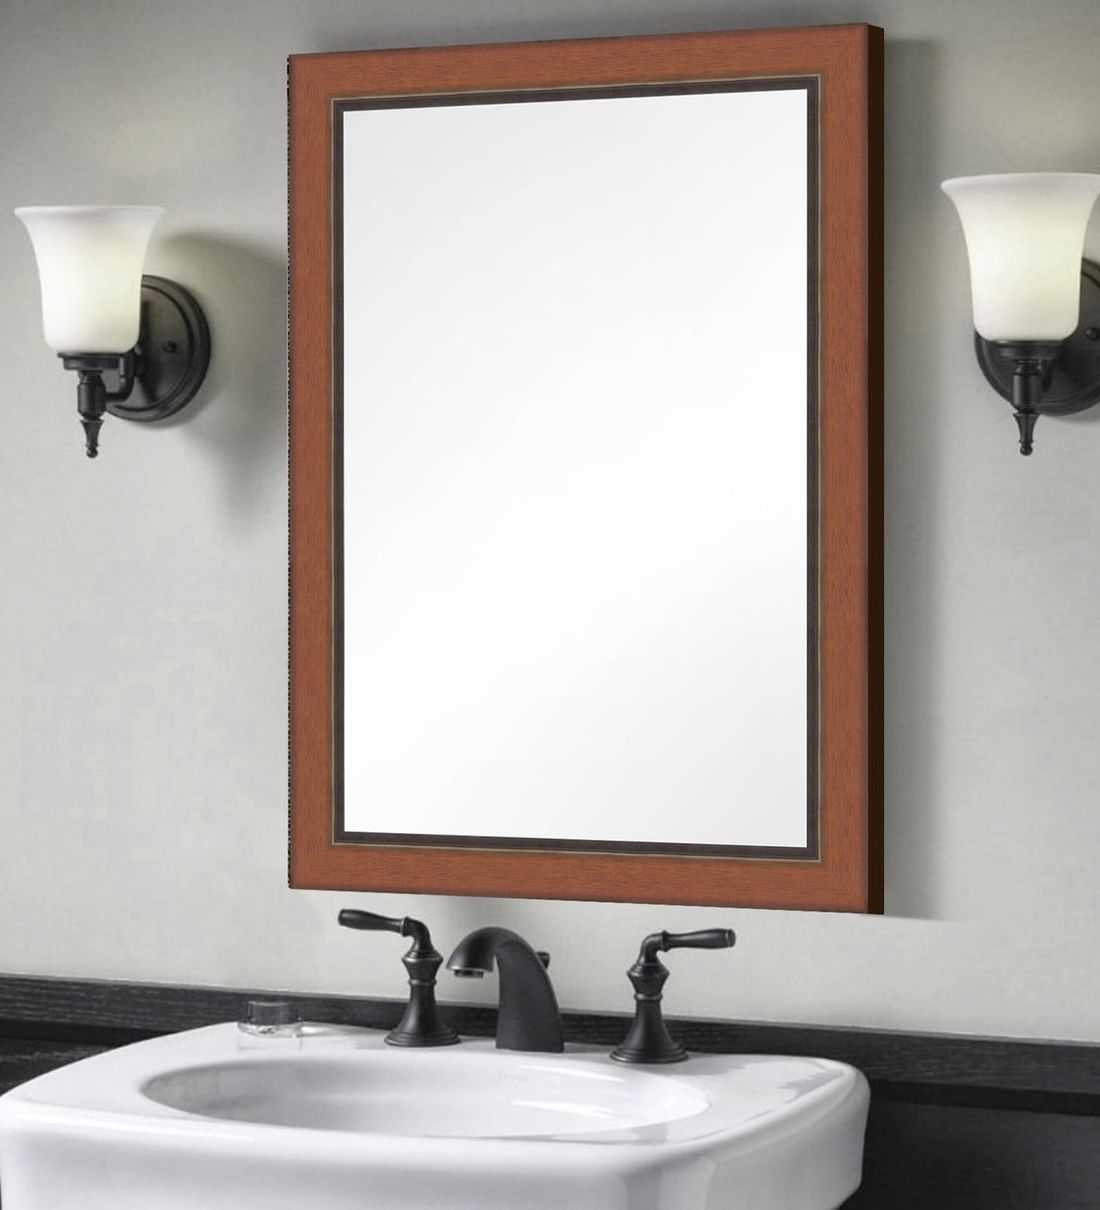 Latest Buy Synthetic Wood Rectangle Wall Mirror In Brown Colourelegant Throughout Rectangular Grid Wall Mirrors (View 5 of 15)